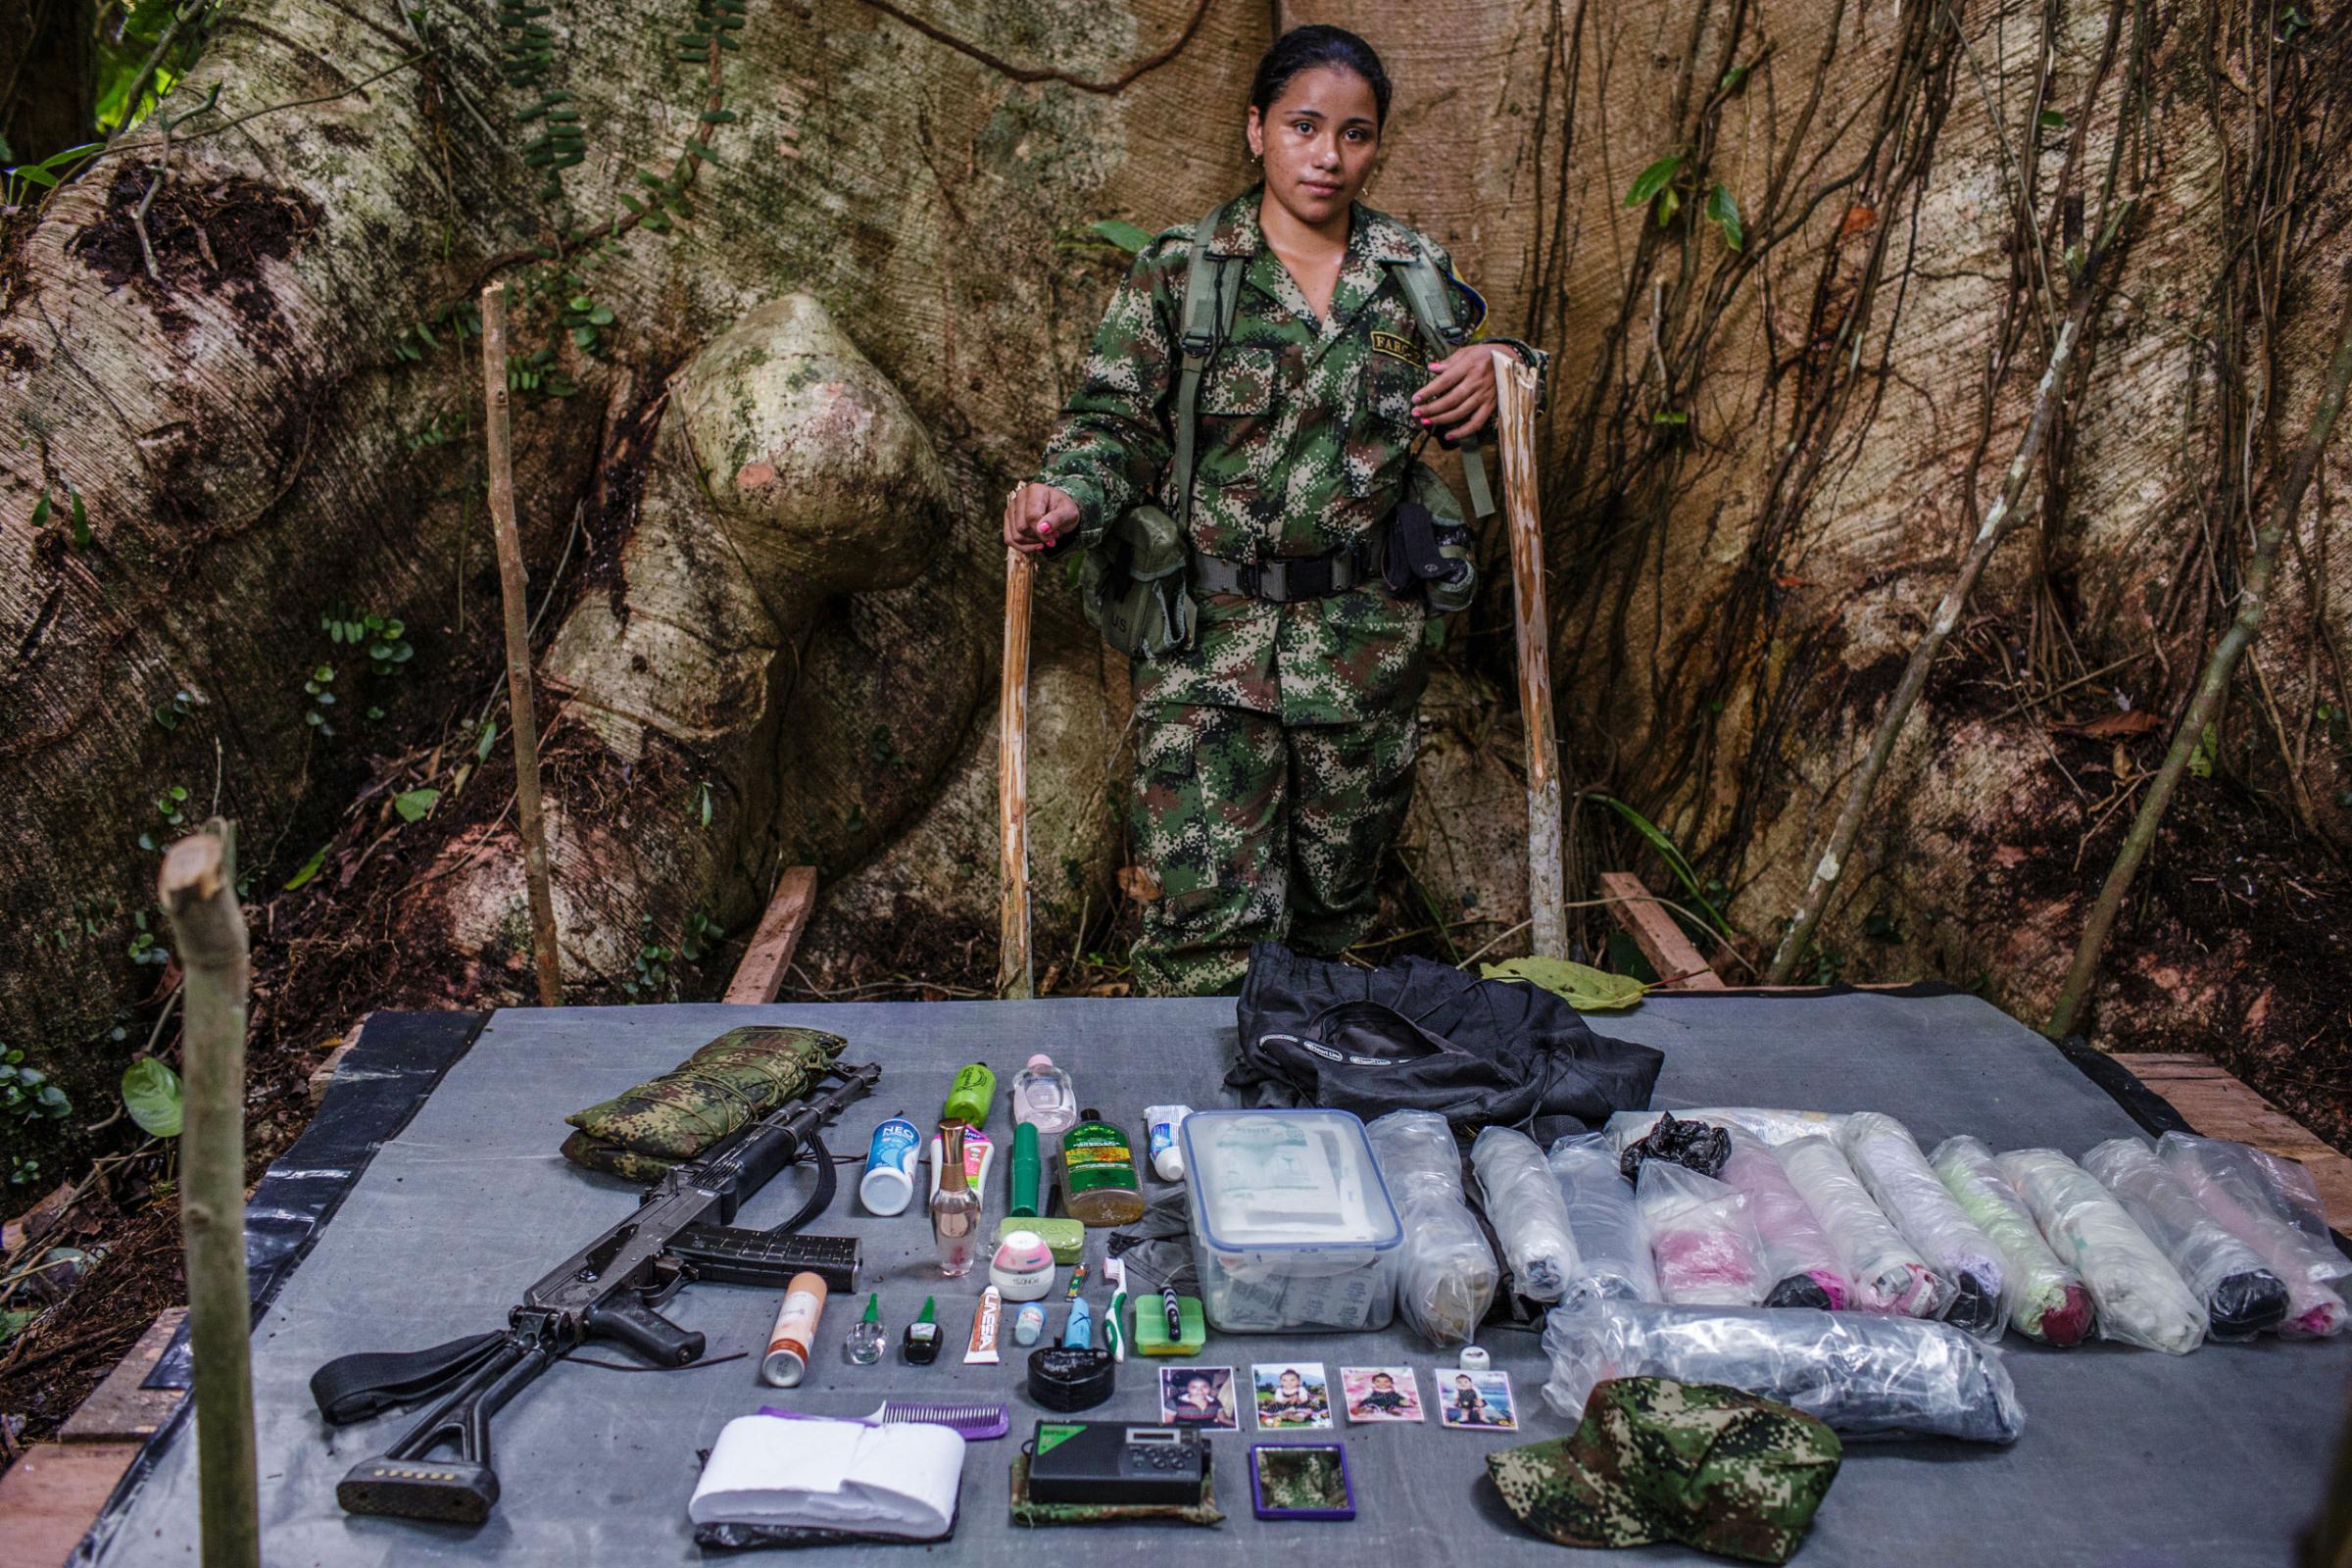 "Katherine," 20-years old, has been with FARC for seven years. She has five older brothers, all of whom are guerrilla fighters. Katherine is a nurse who works with the FARC medical team. Her nine-month-old daughter lives with her grandmother.